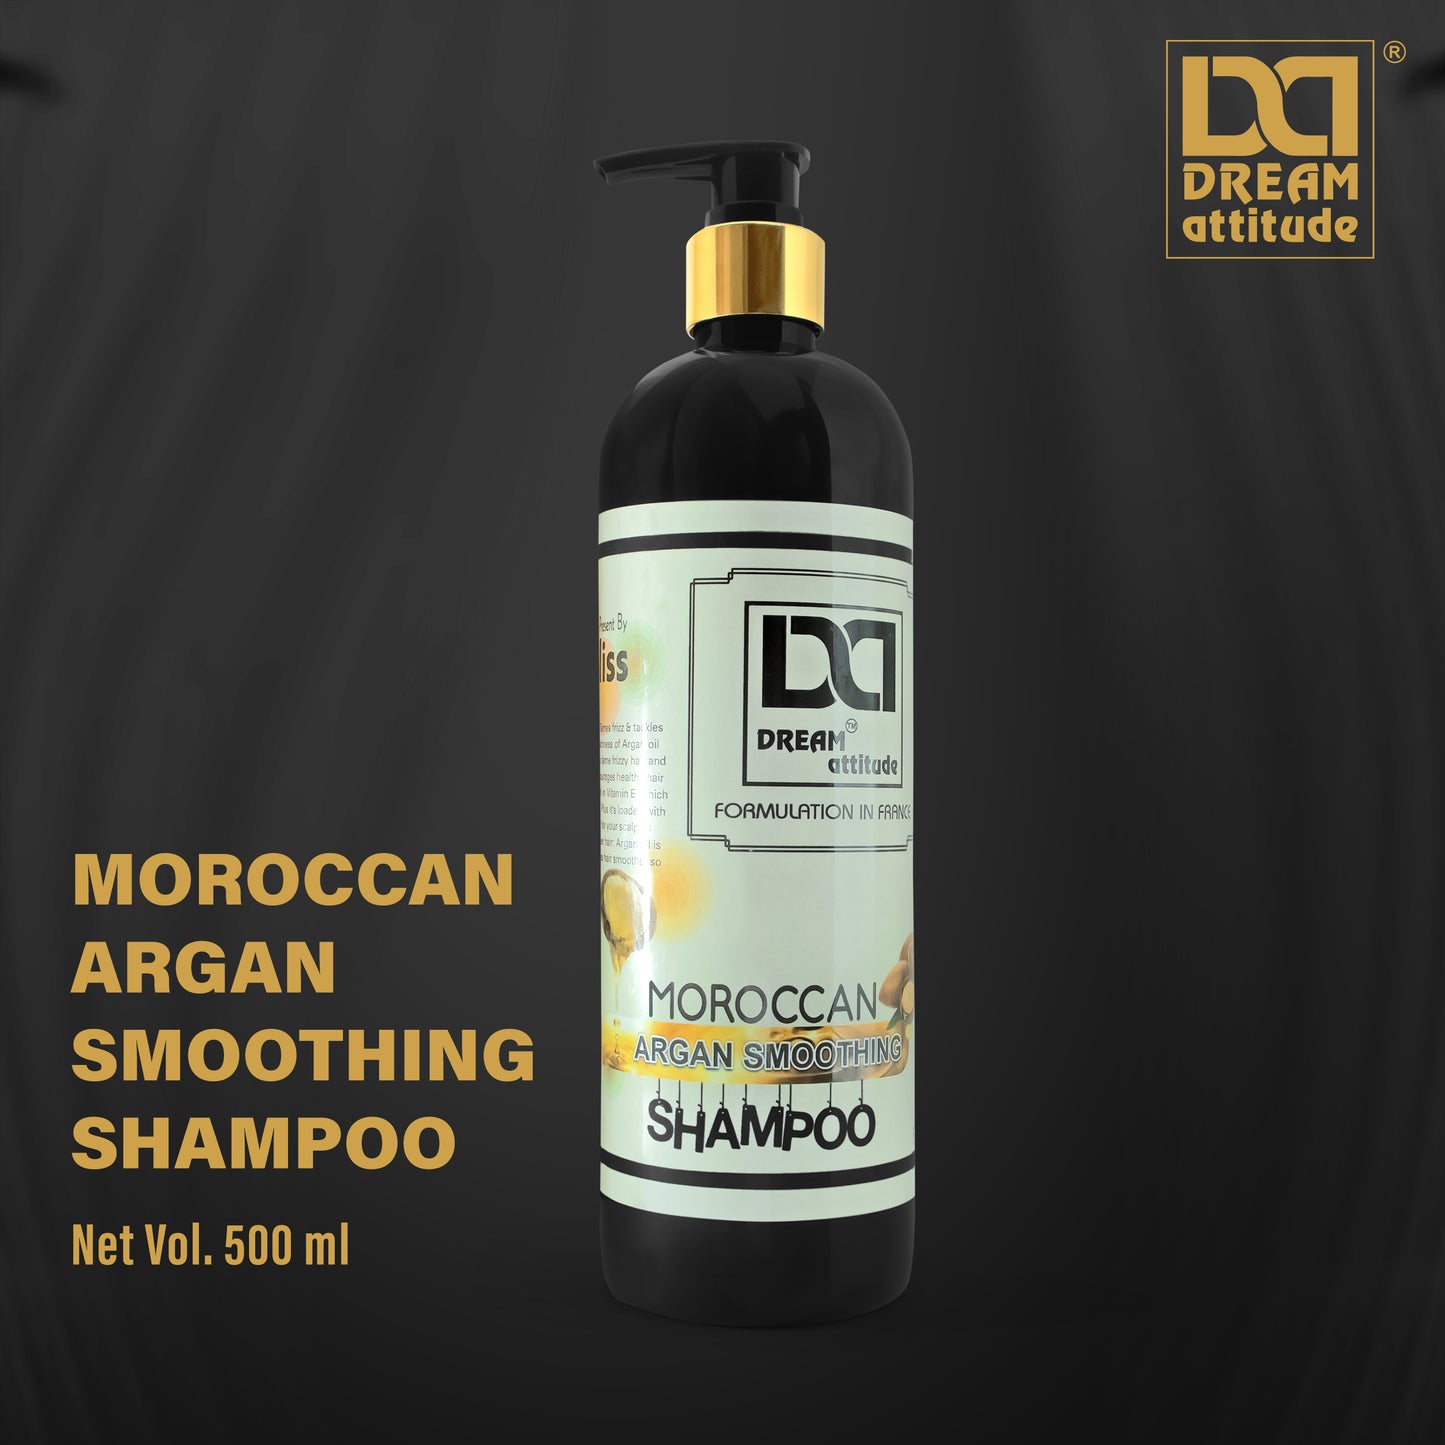 Dream Attitude Moroccan Argan Smoothing Shampoo - Natural Luxury for Your Hair [500ml]